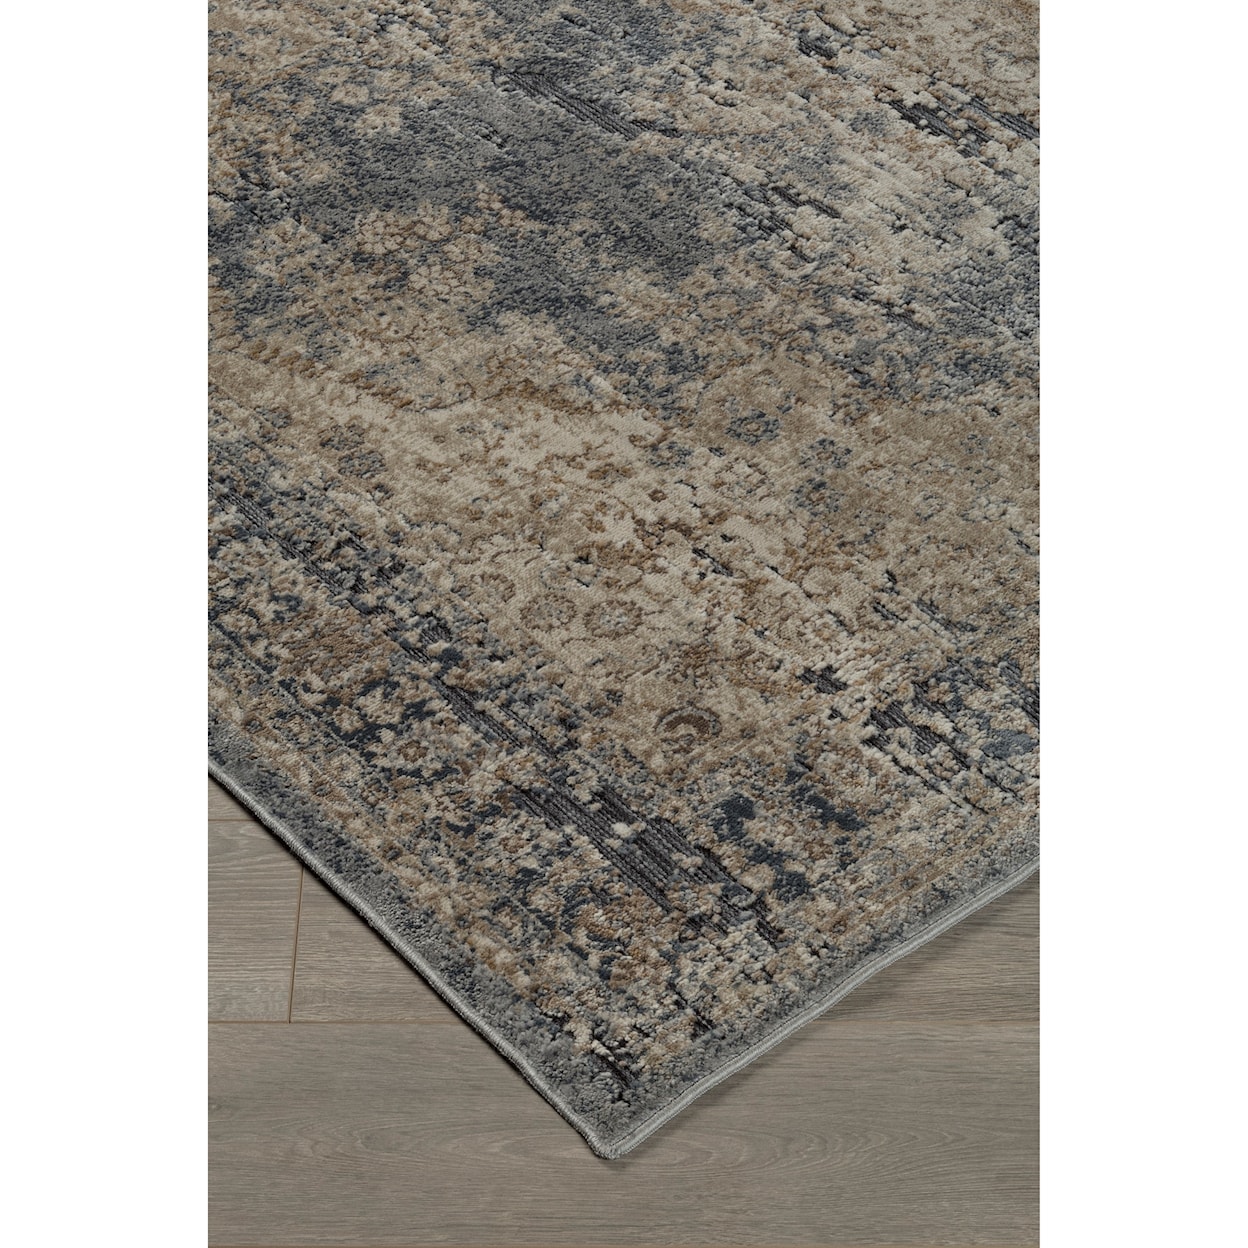 Michael Alan Select Traditional Classics Area Rugs South Blue/Tan Large Rug